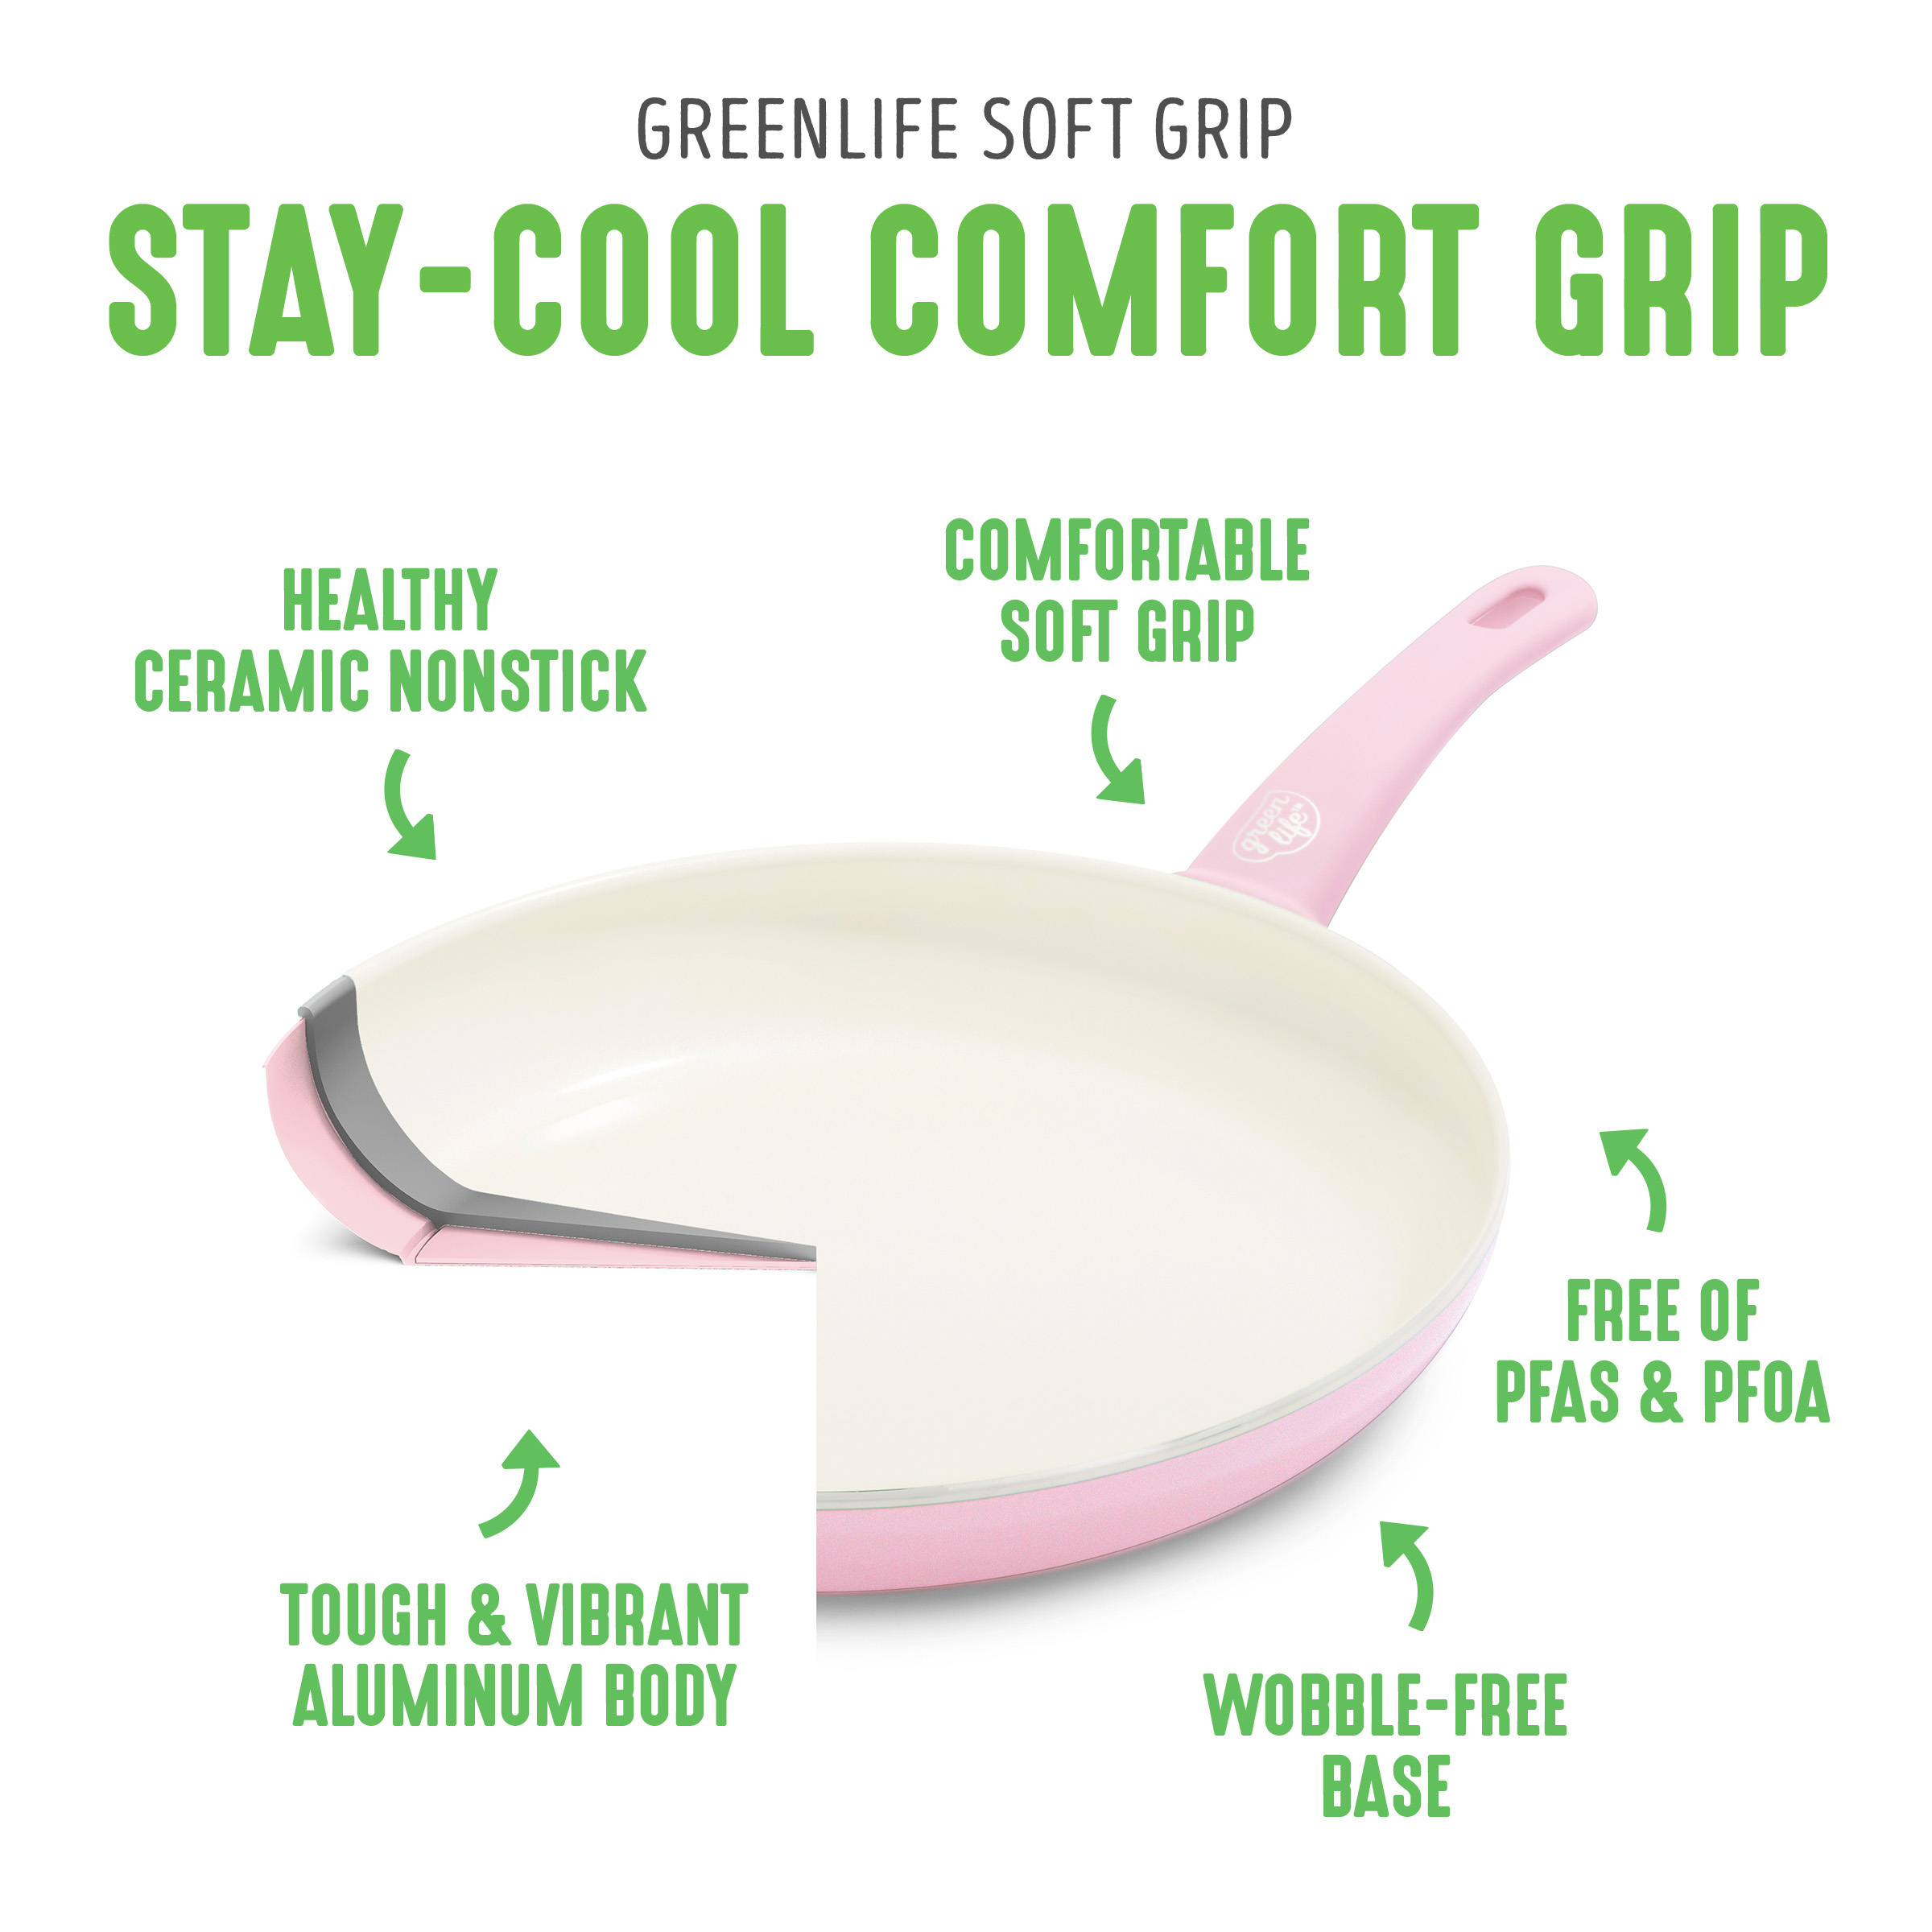 GreenLife 18-Piece Soft Grip Toxin-Free Healthy Ceramic Non-Stick Cookware Set, Pink, Dishwasher Safe - image 5 of 12